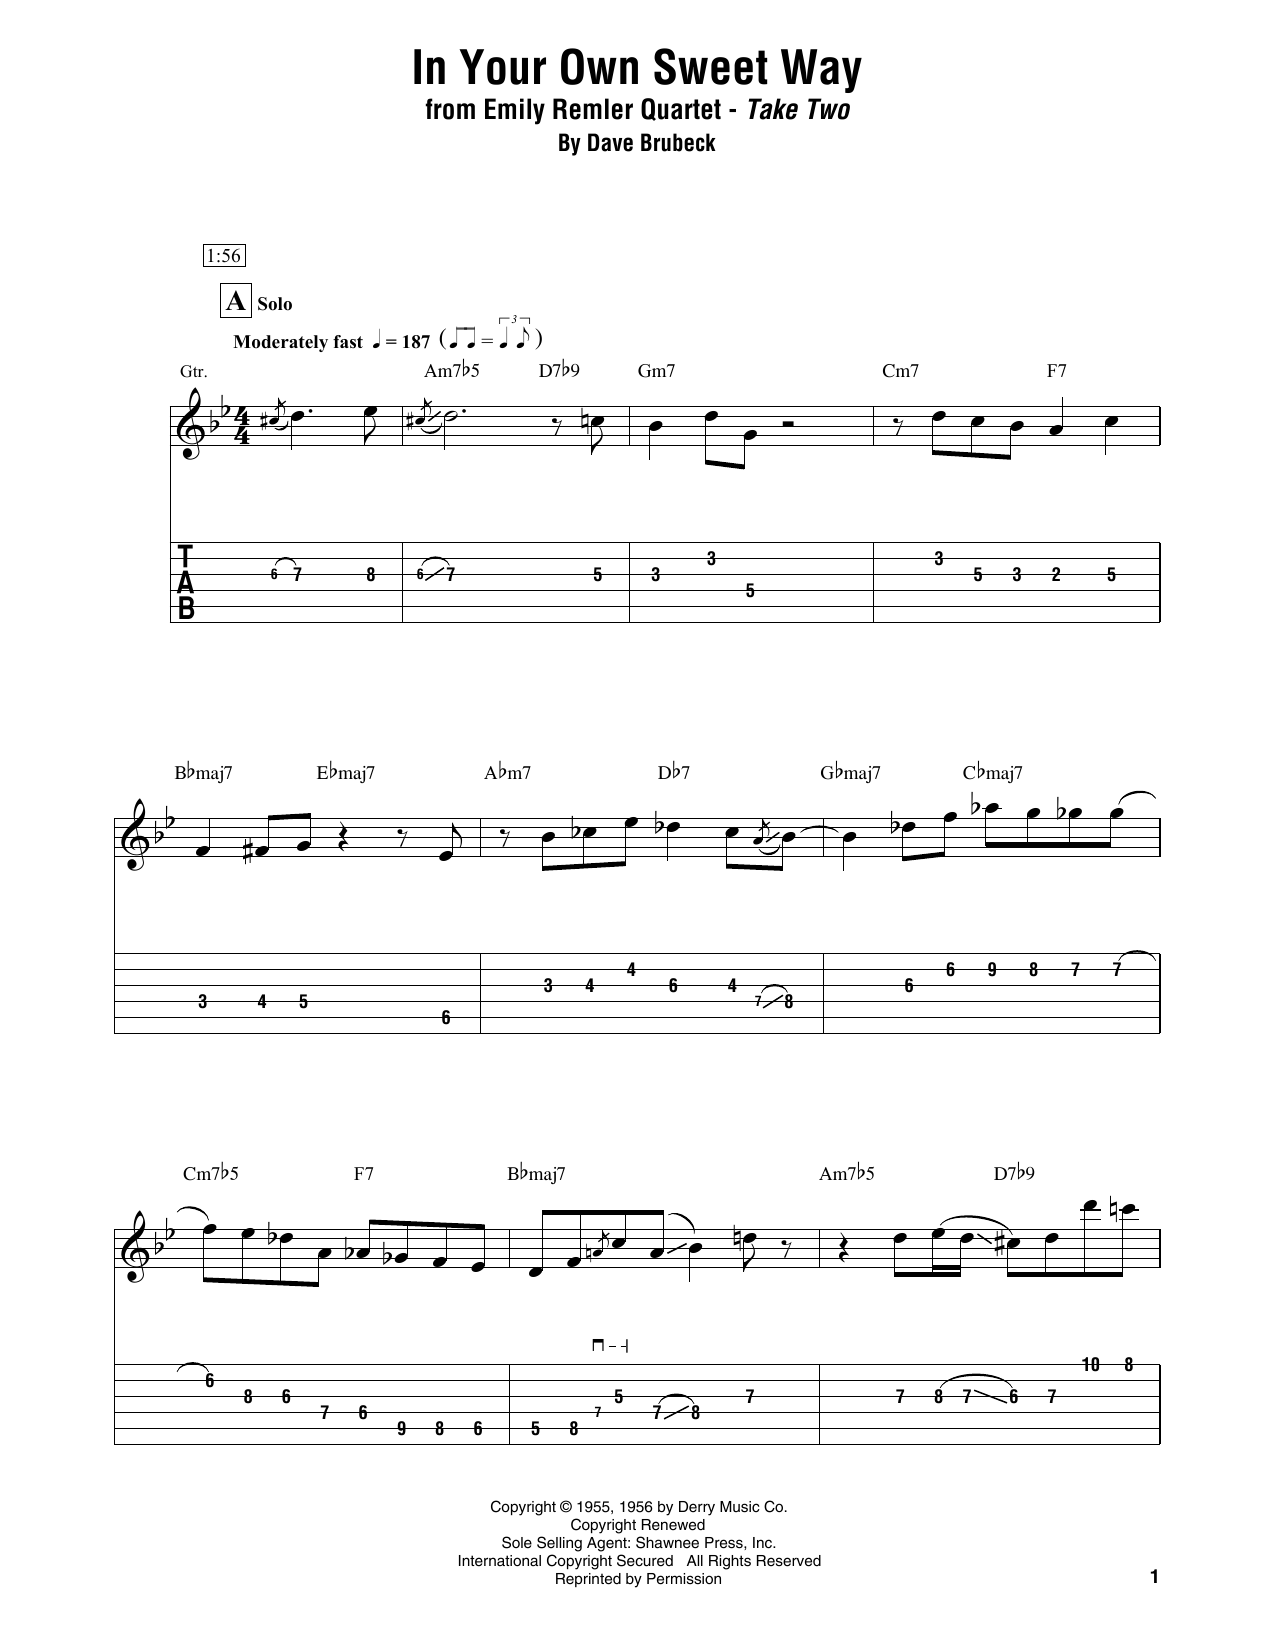 Emily Remler Quartet In Your Own Sweet Way sheet music notes and chords. Download Printable PDF.